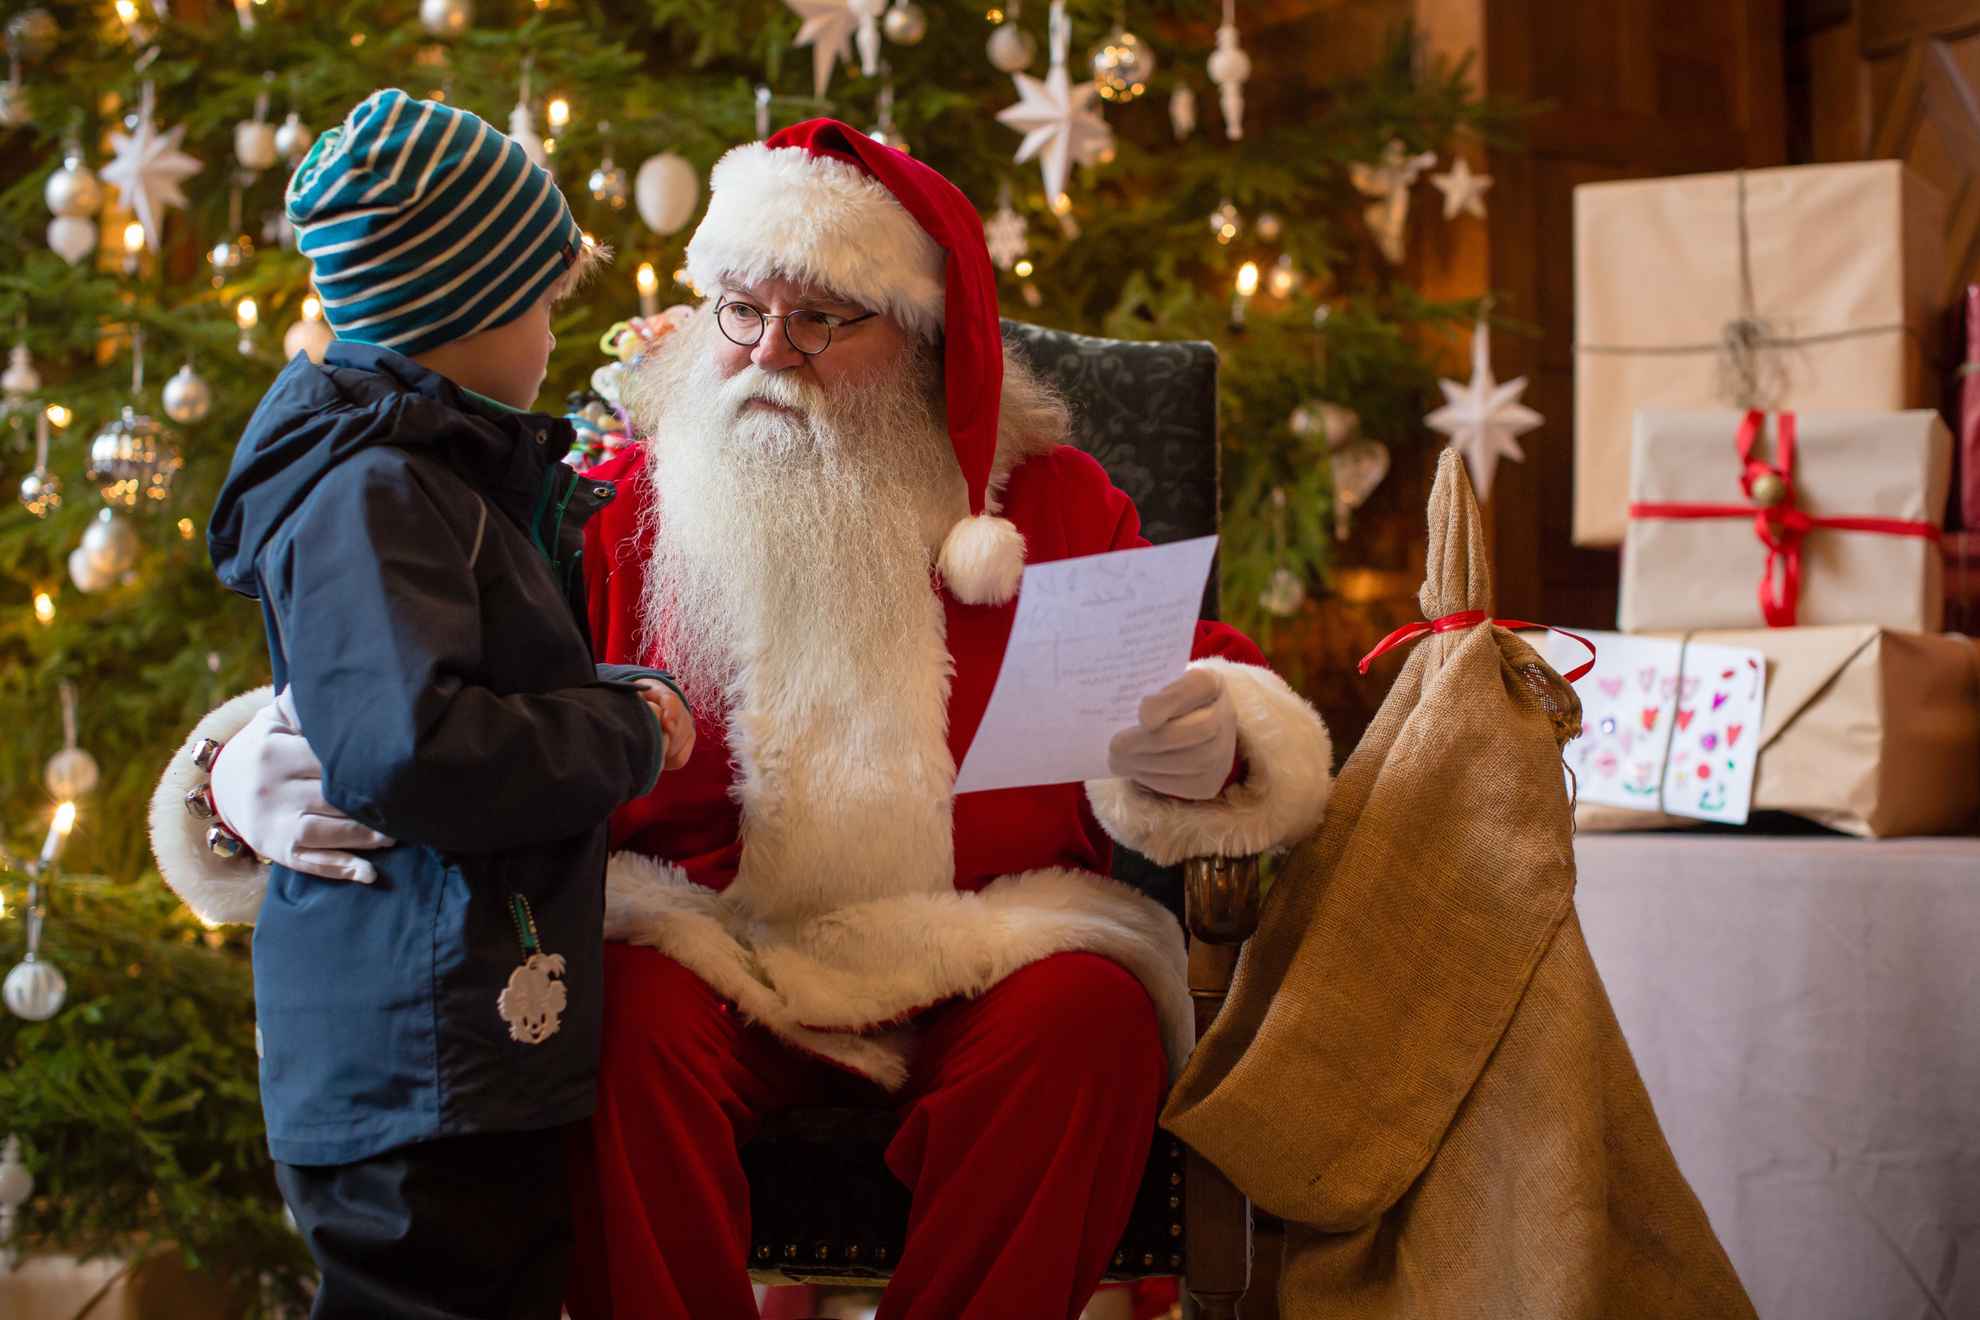 Father Christmas, an old man with white beard wearing a red gown sits in front of a Christmas tree talking to a child.